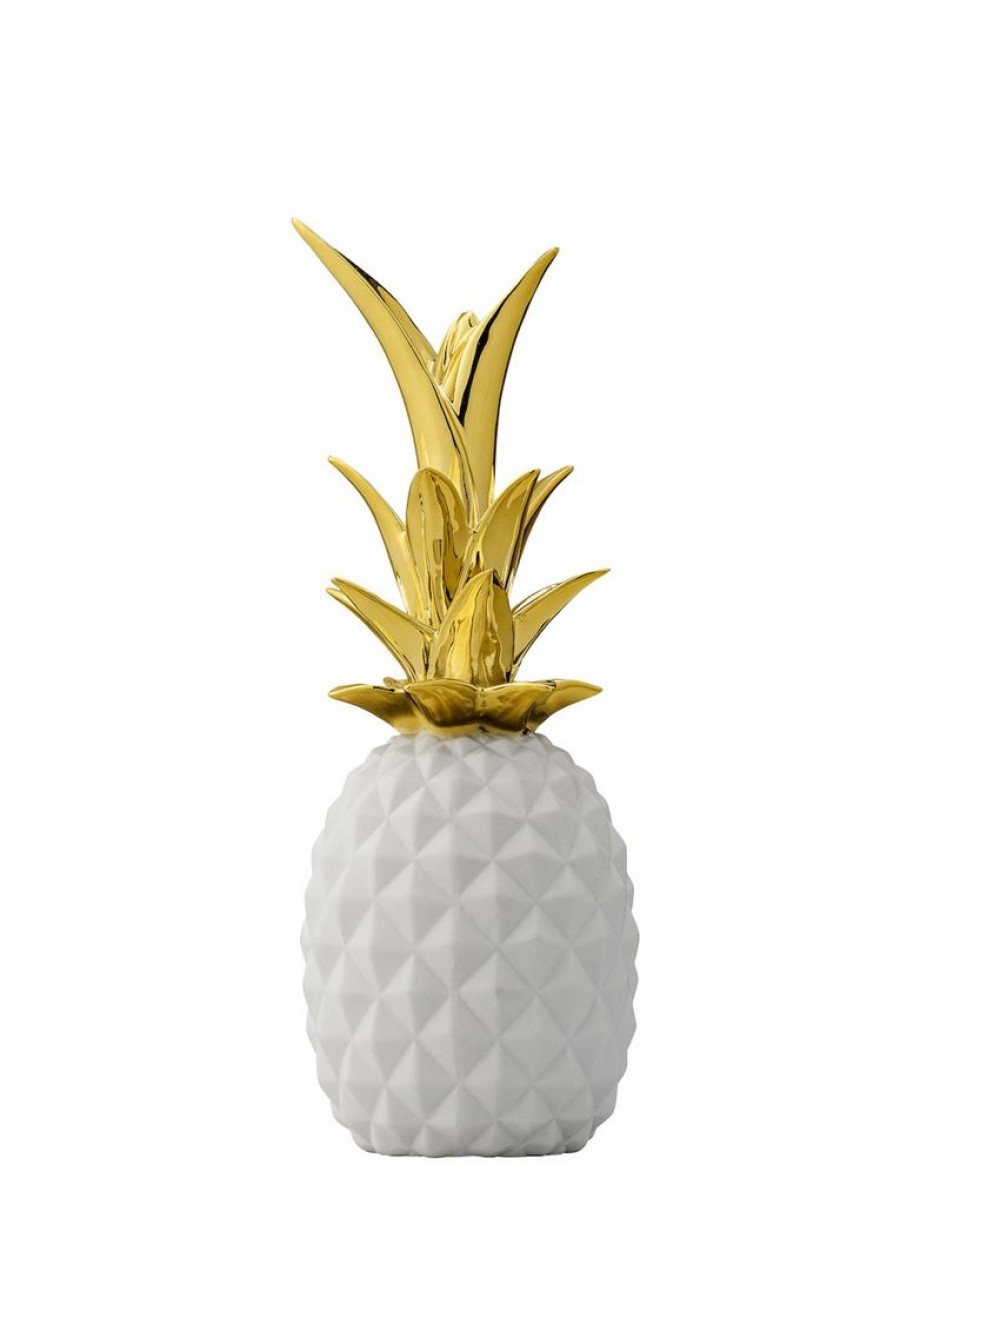 CERAMIC PINEAPPLE, GOLD AND IVORY - Image 0